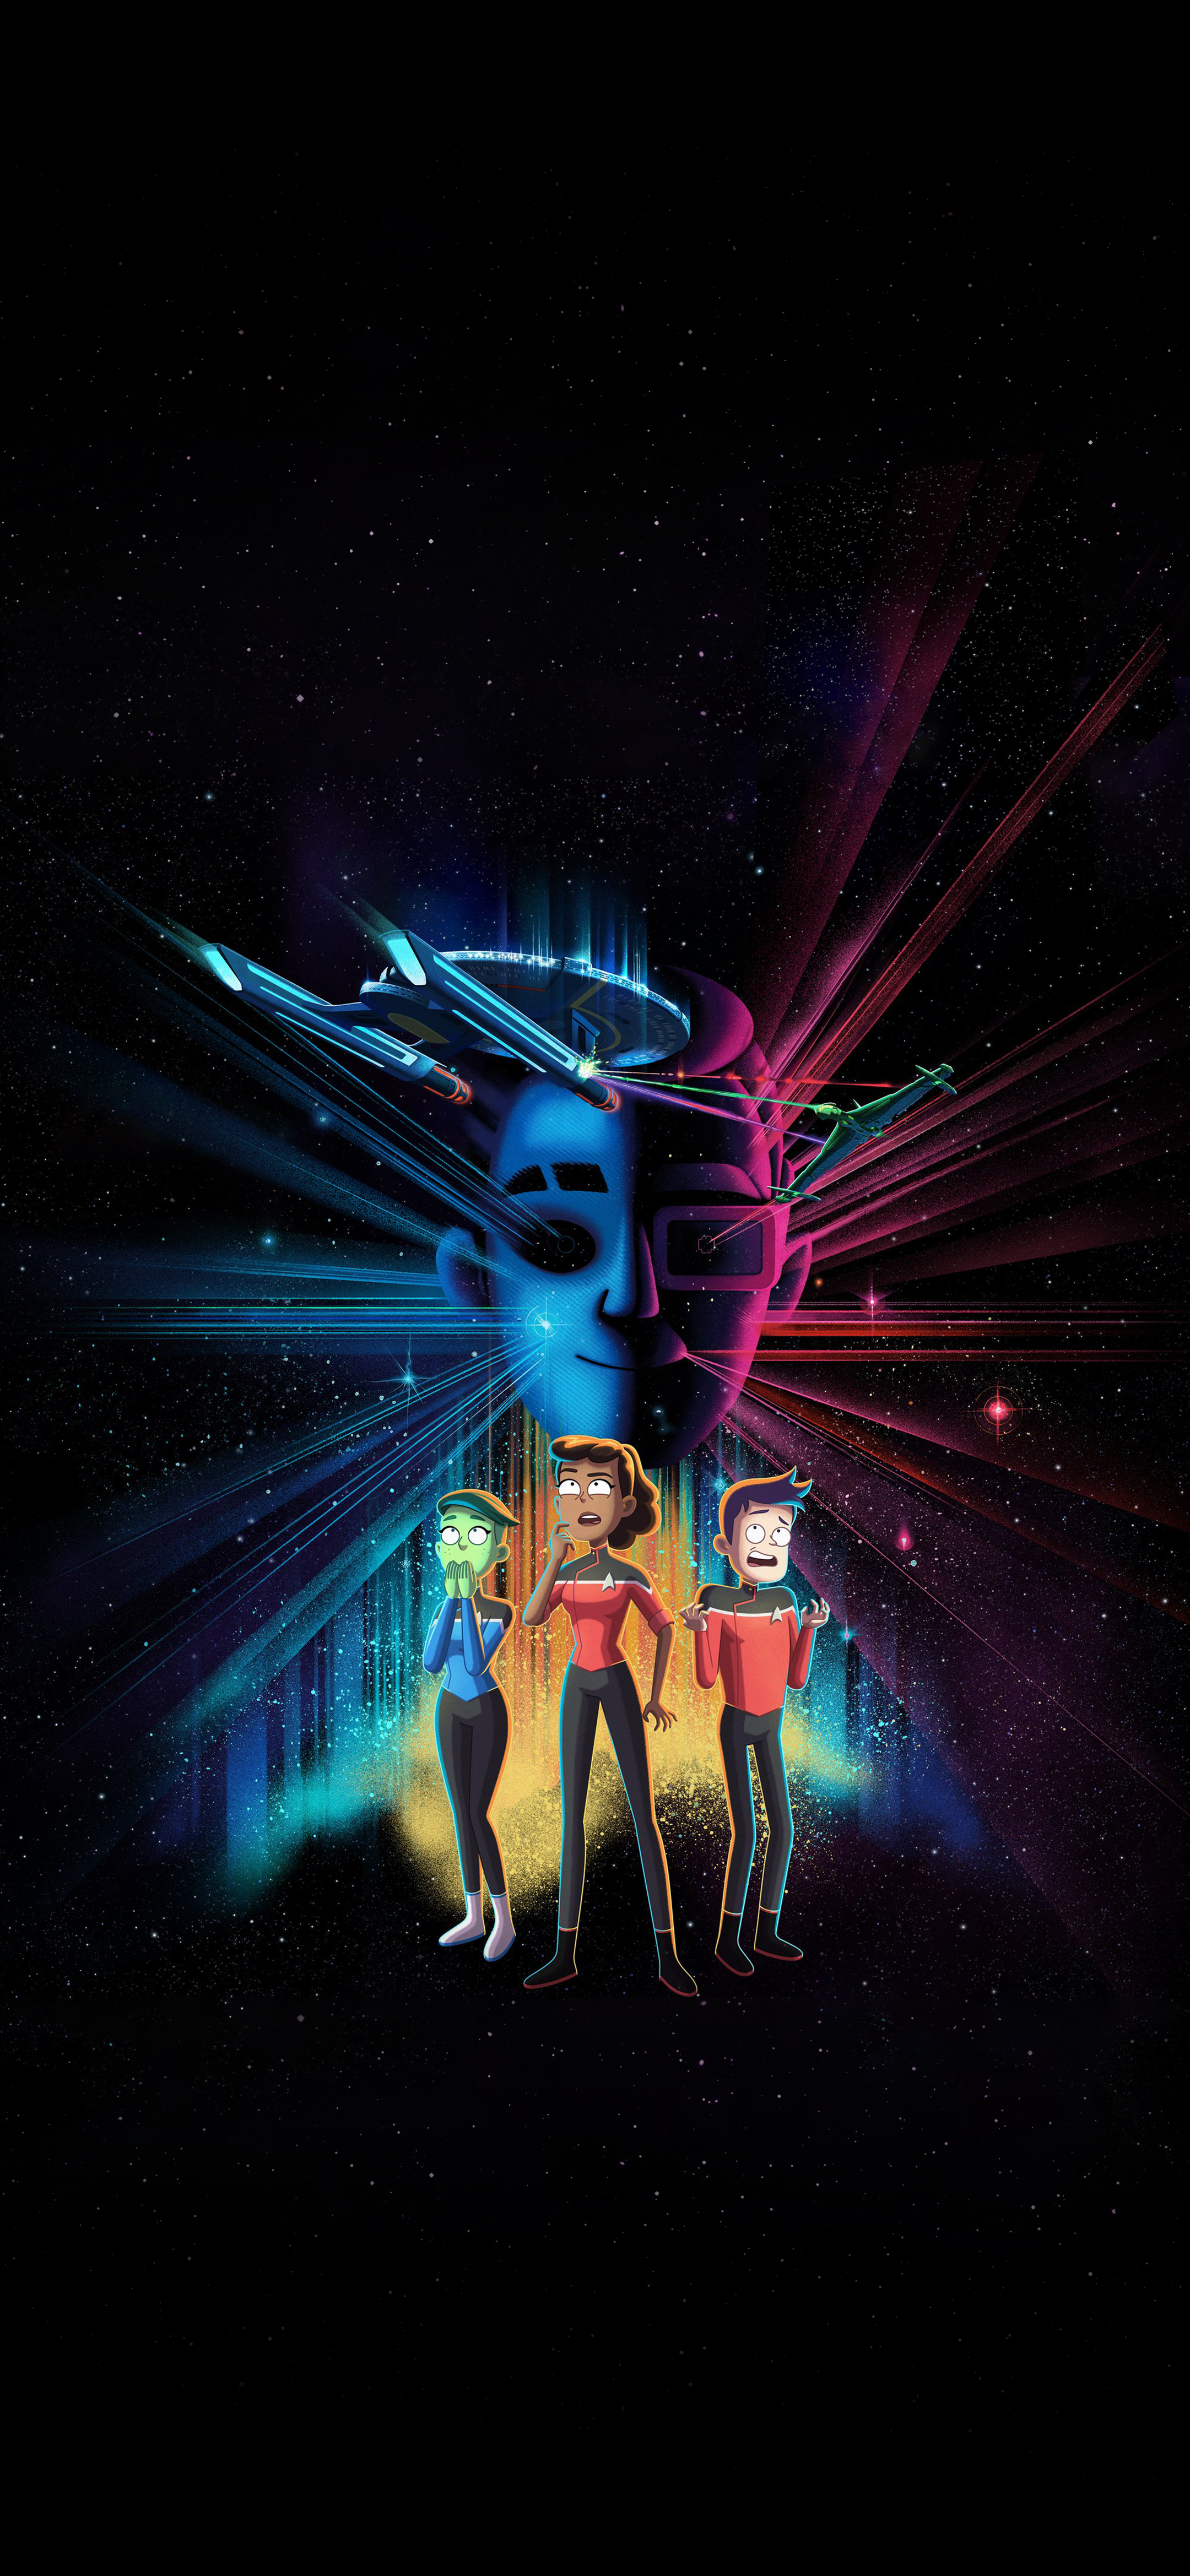 Removed the text from the new star trek lower decks poster to make a mobile wallpaper rmobilewallpaper